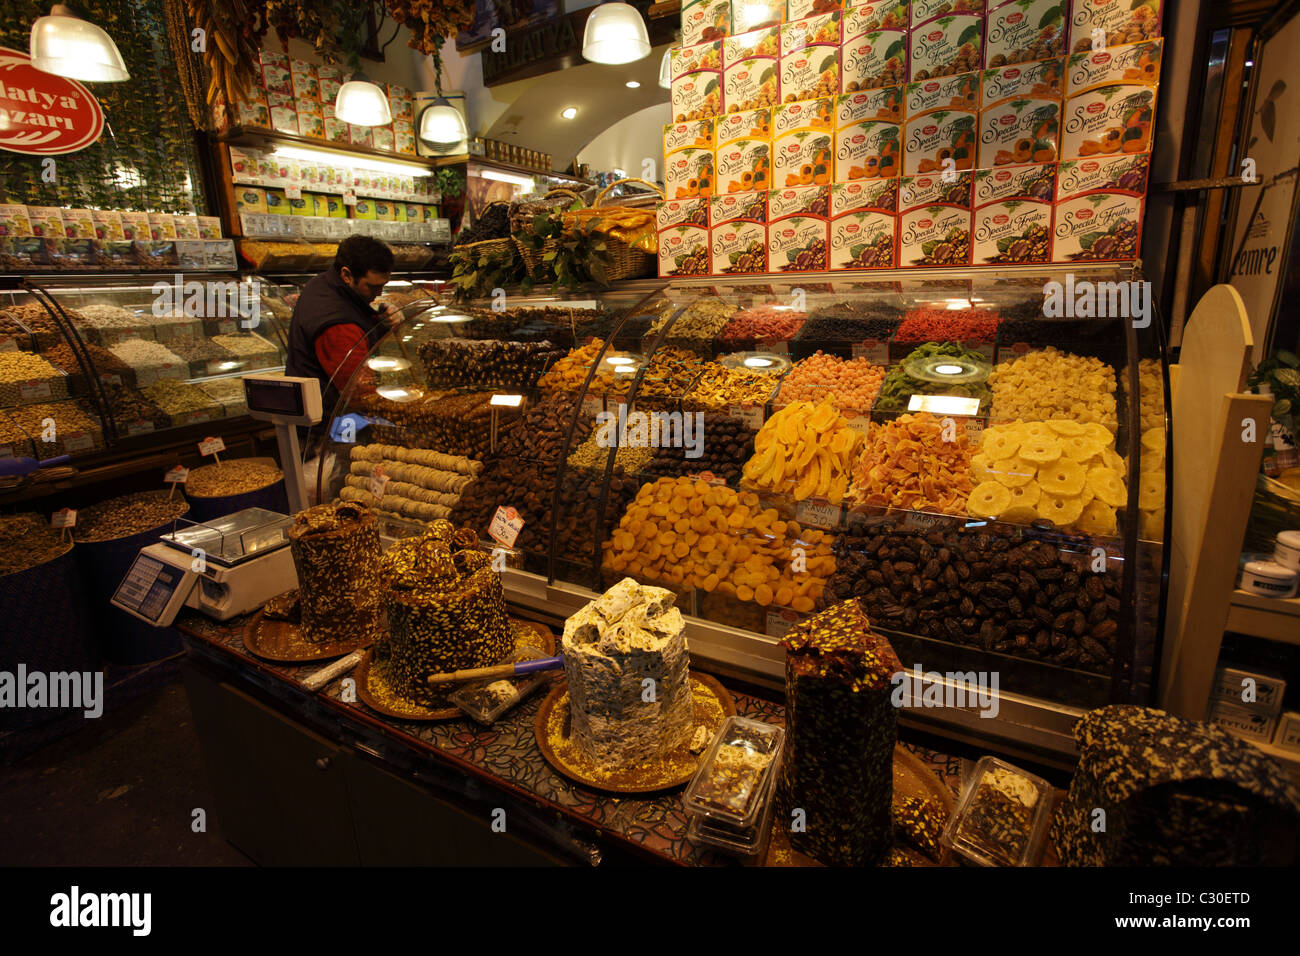 Sweet and spice stall, Grand Bazaar, Istanbul, Turkey Stock Photo